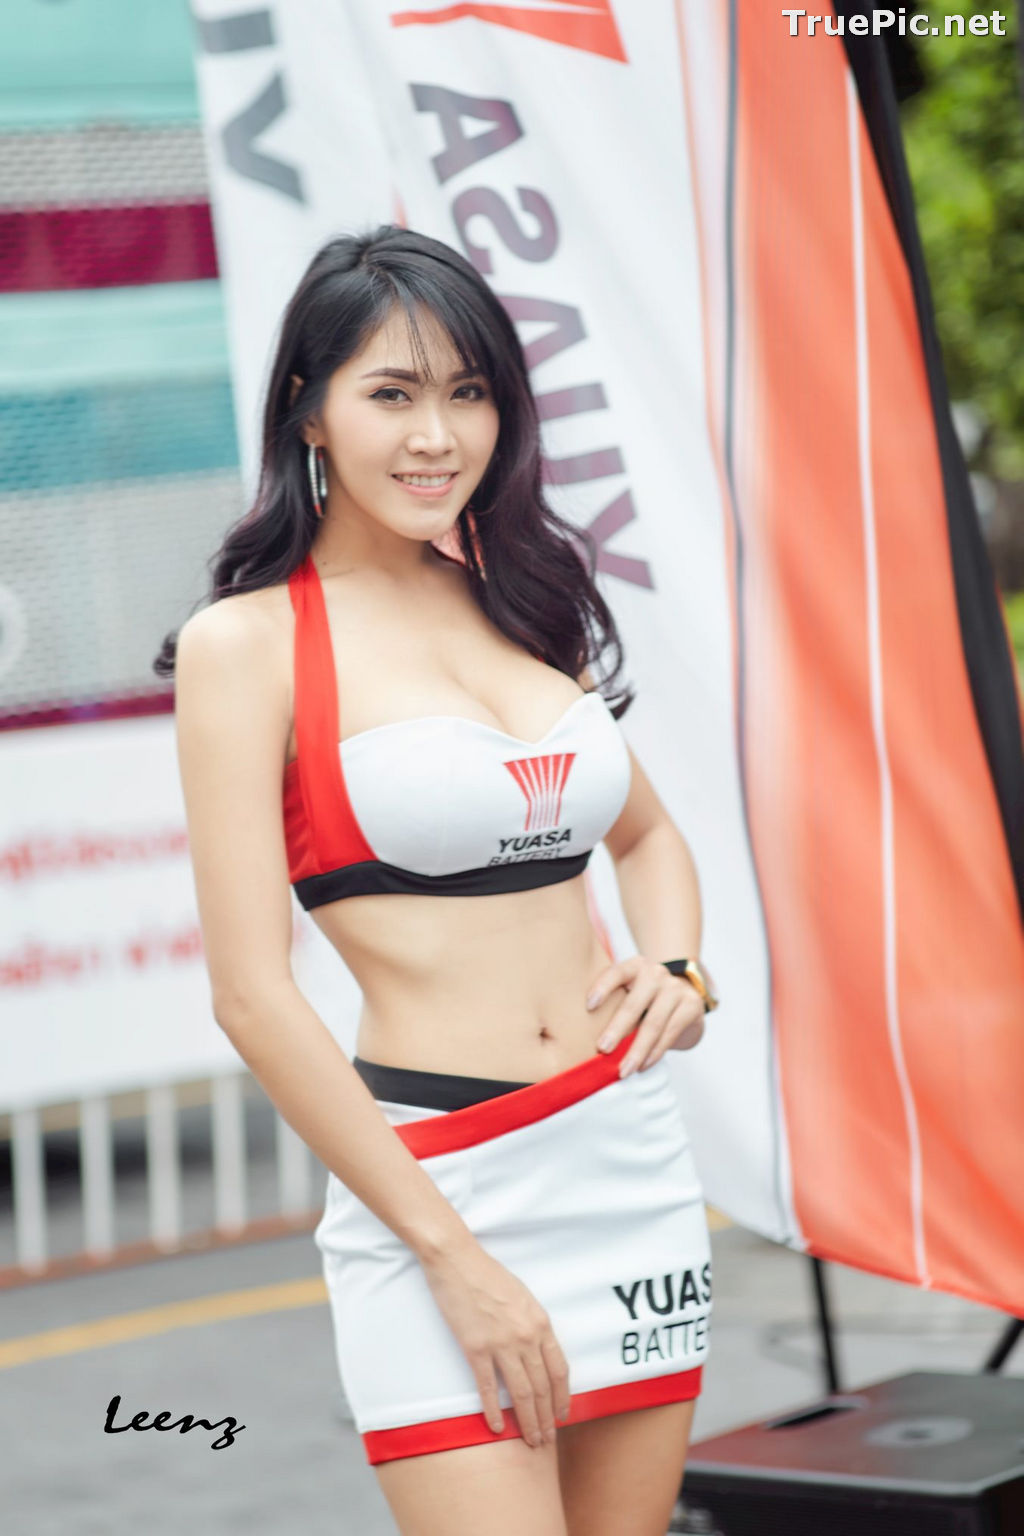 Image Thailand Racing Model - Thailand Showgirl Model Collection #1 - TruePic.net - Picture-110